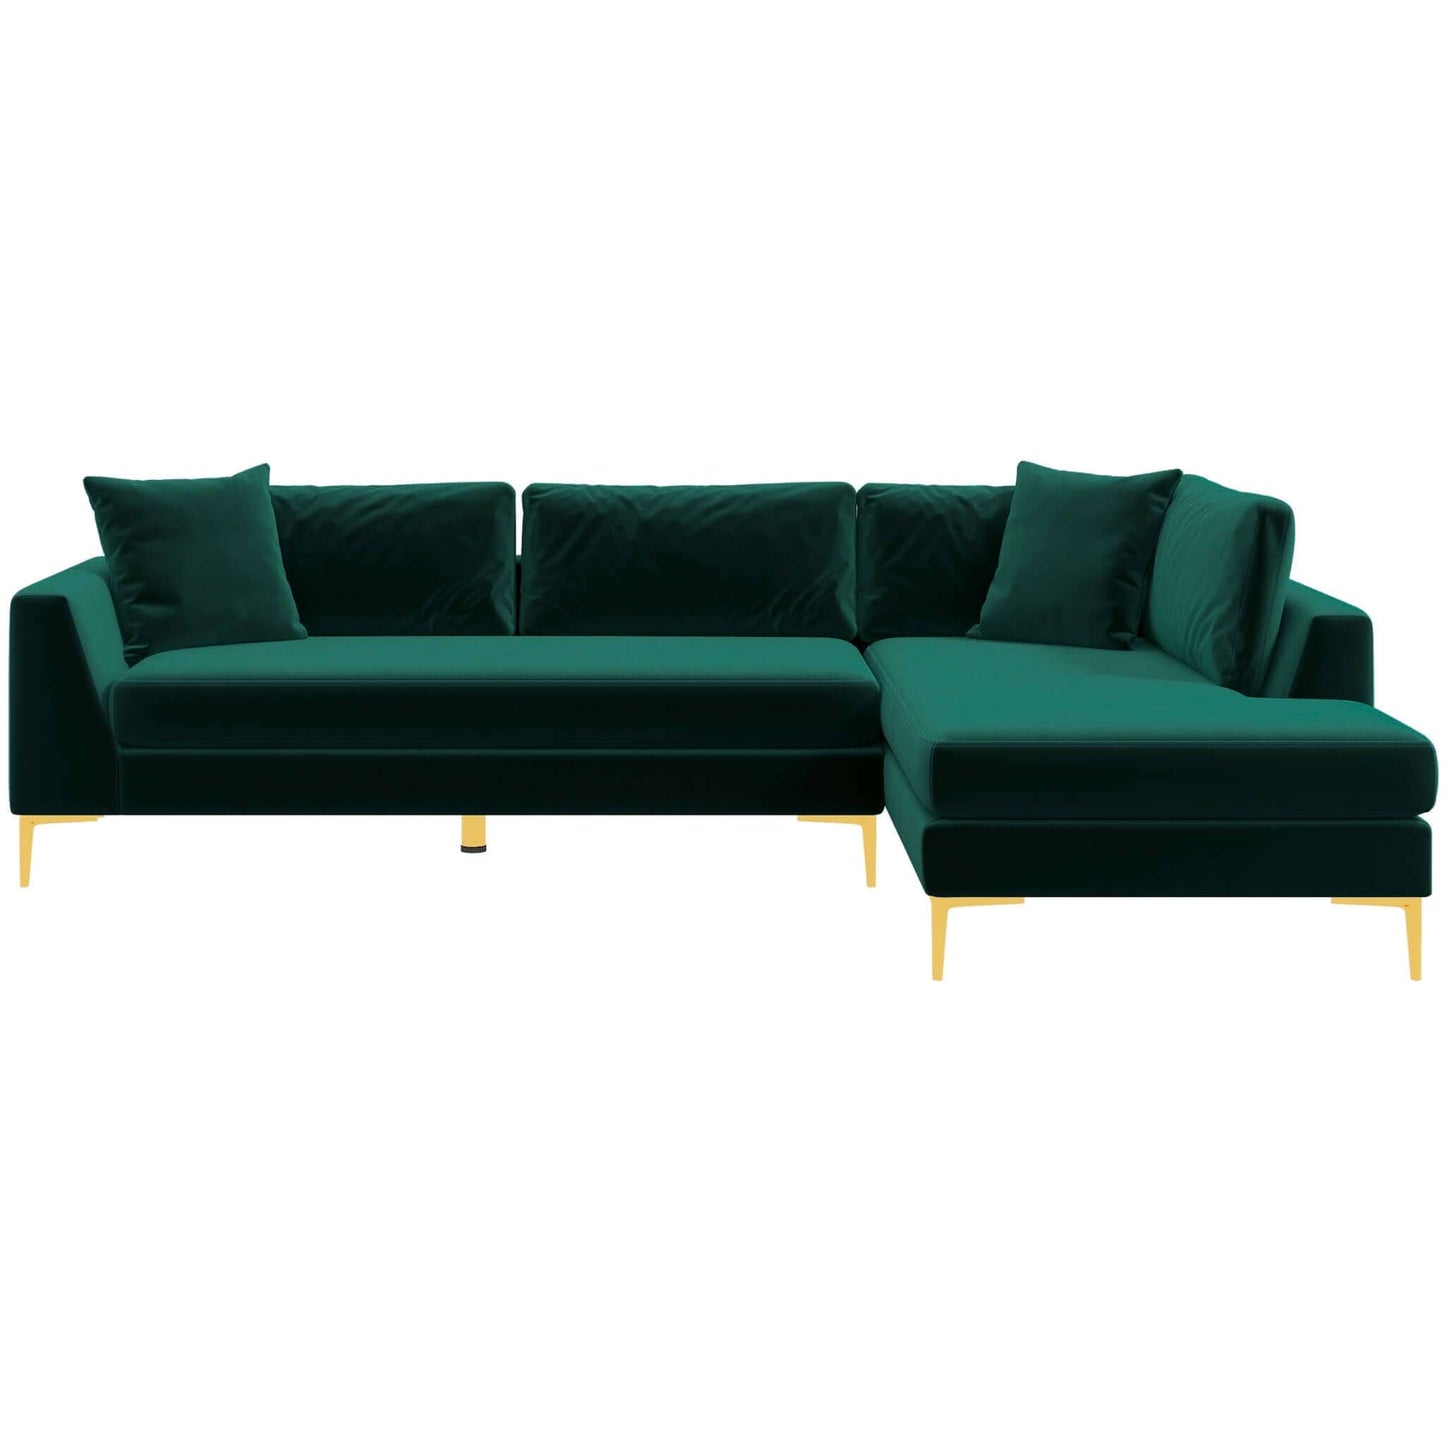 Ashcroft Furniture Co Sectional Sofas Right Sectional Mano Mid-Century Modern L-Shaped Velvet Sectional Sofa in Green